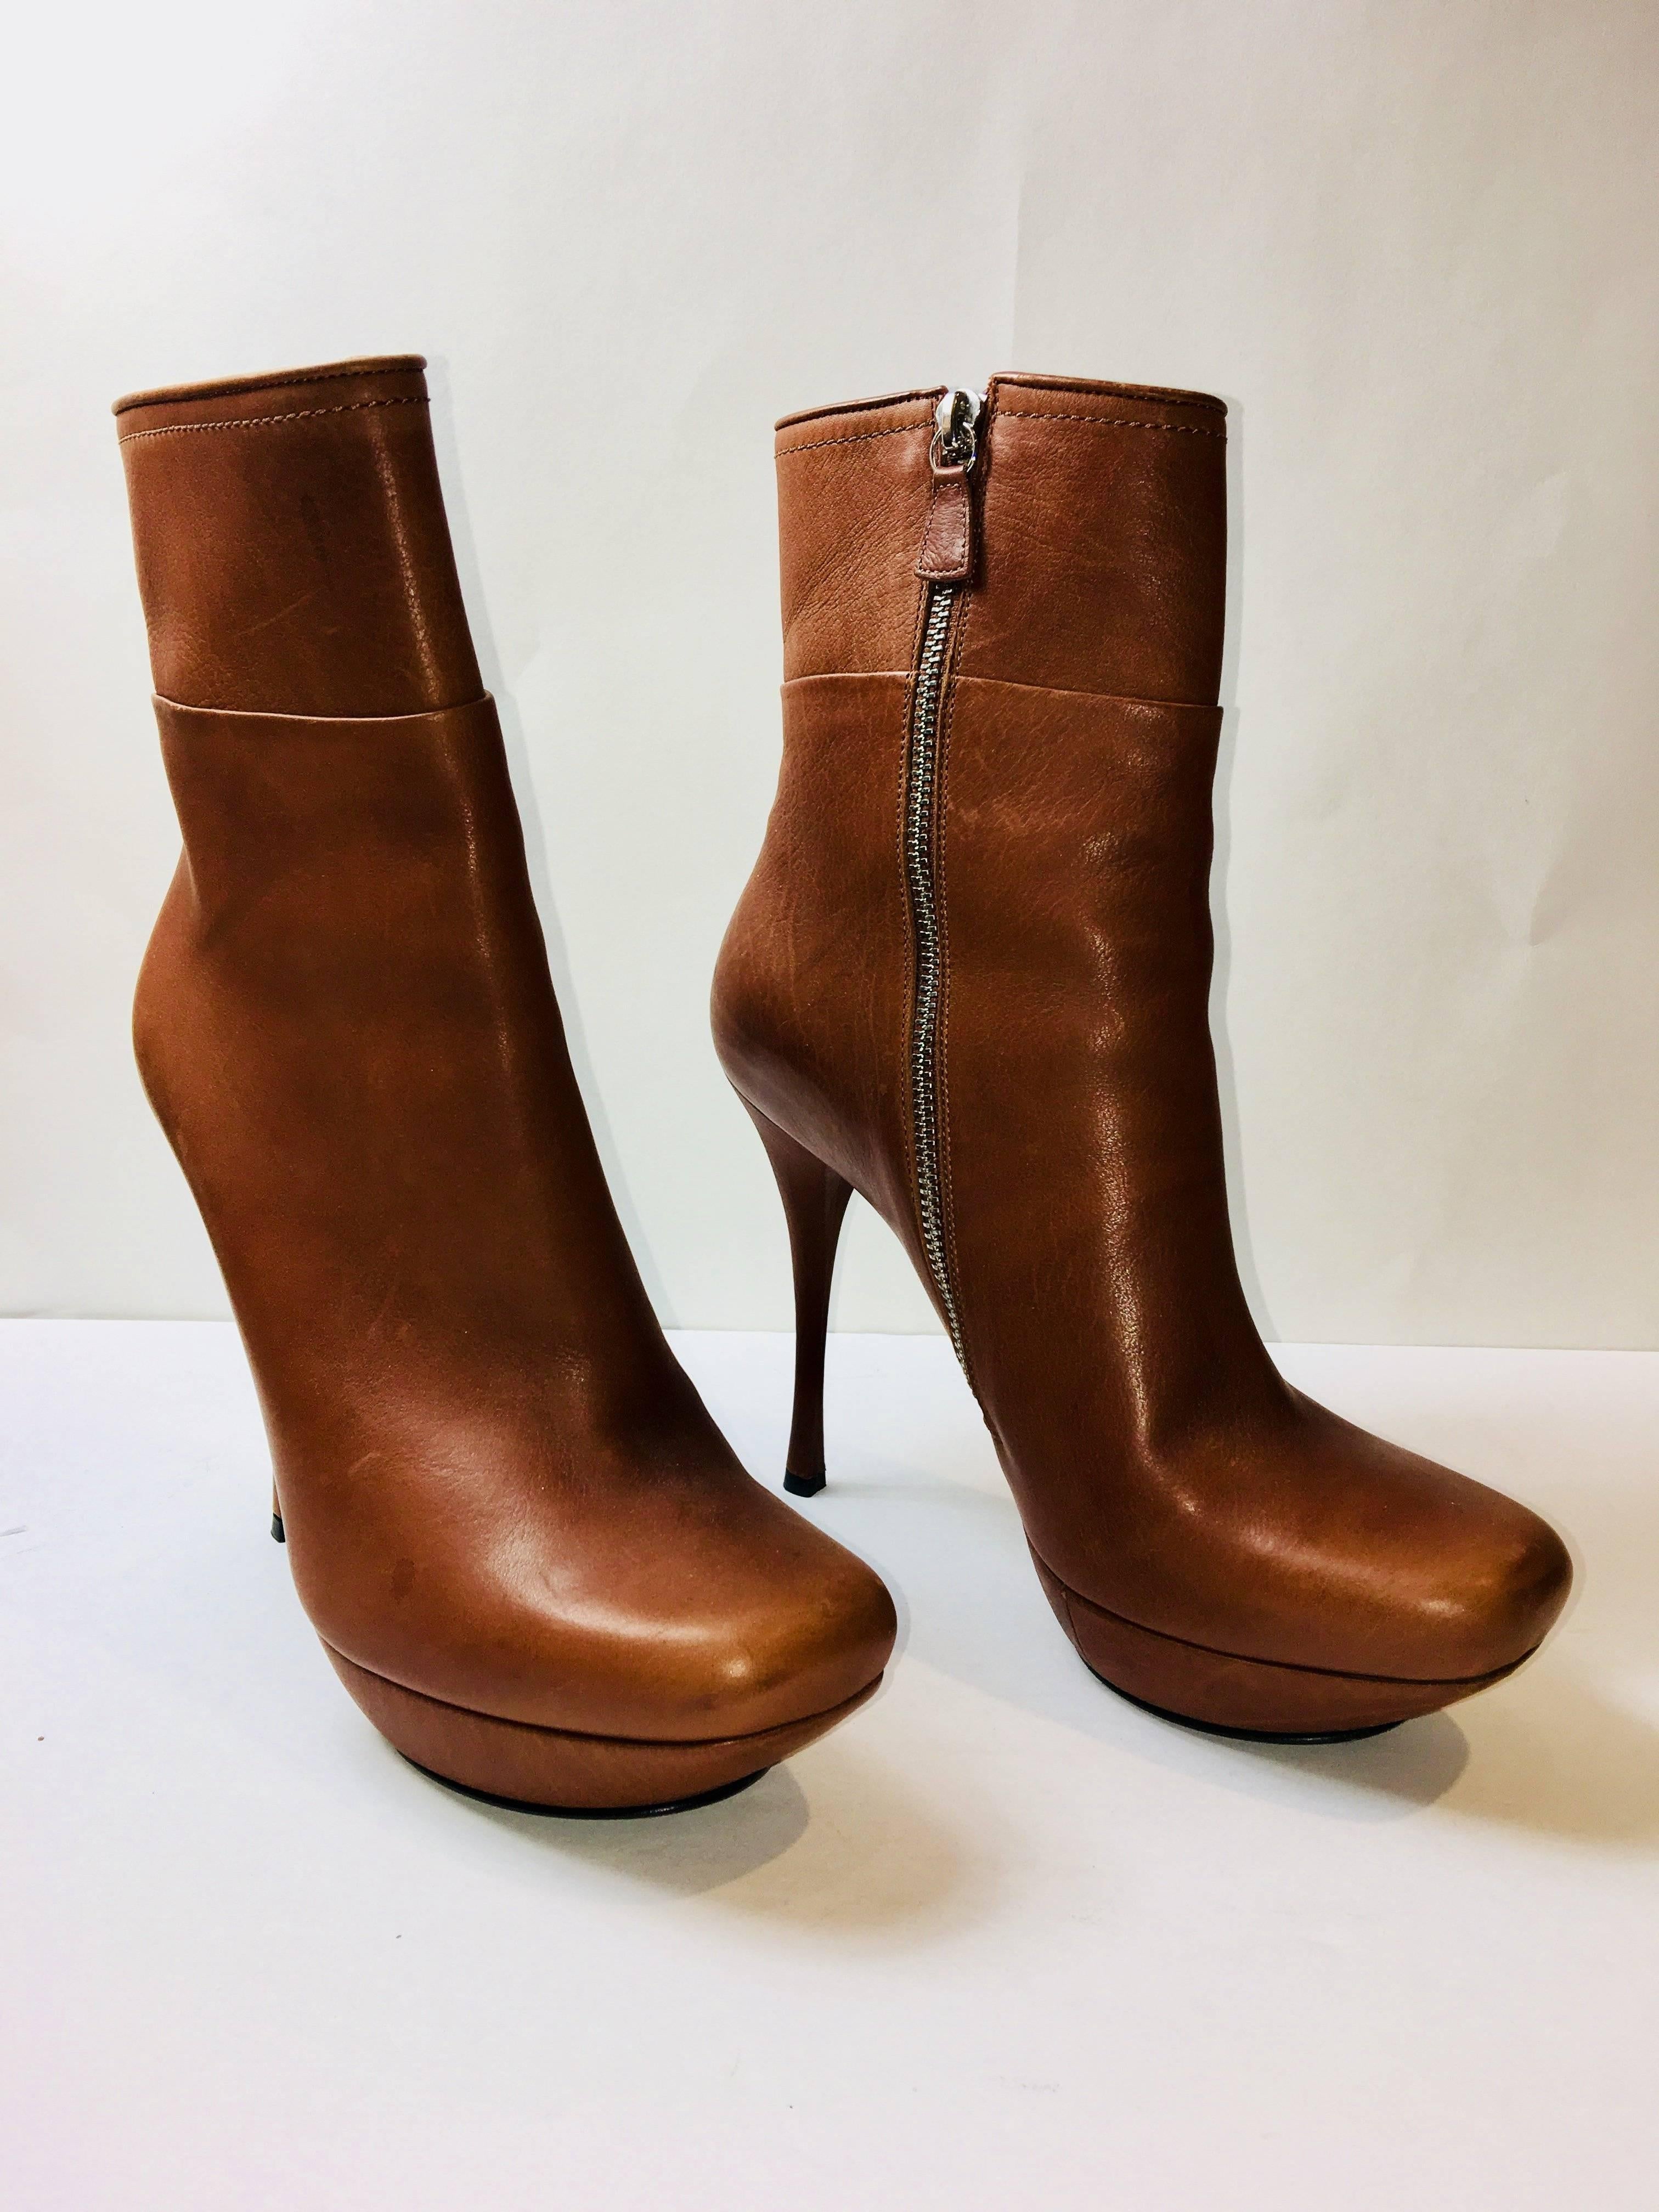 Lanvin Platform Ankle Boot in Cognac Leather with Side Zippers.